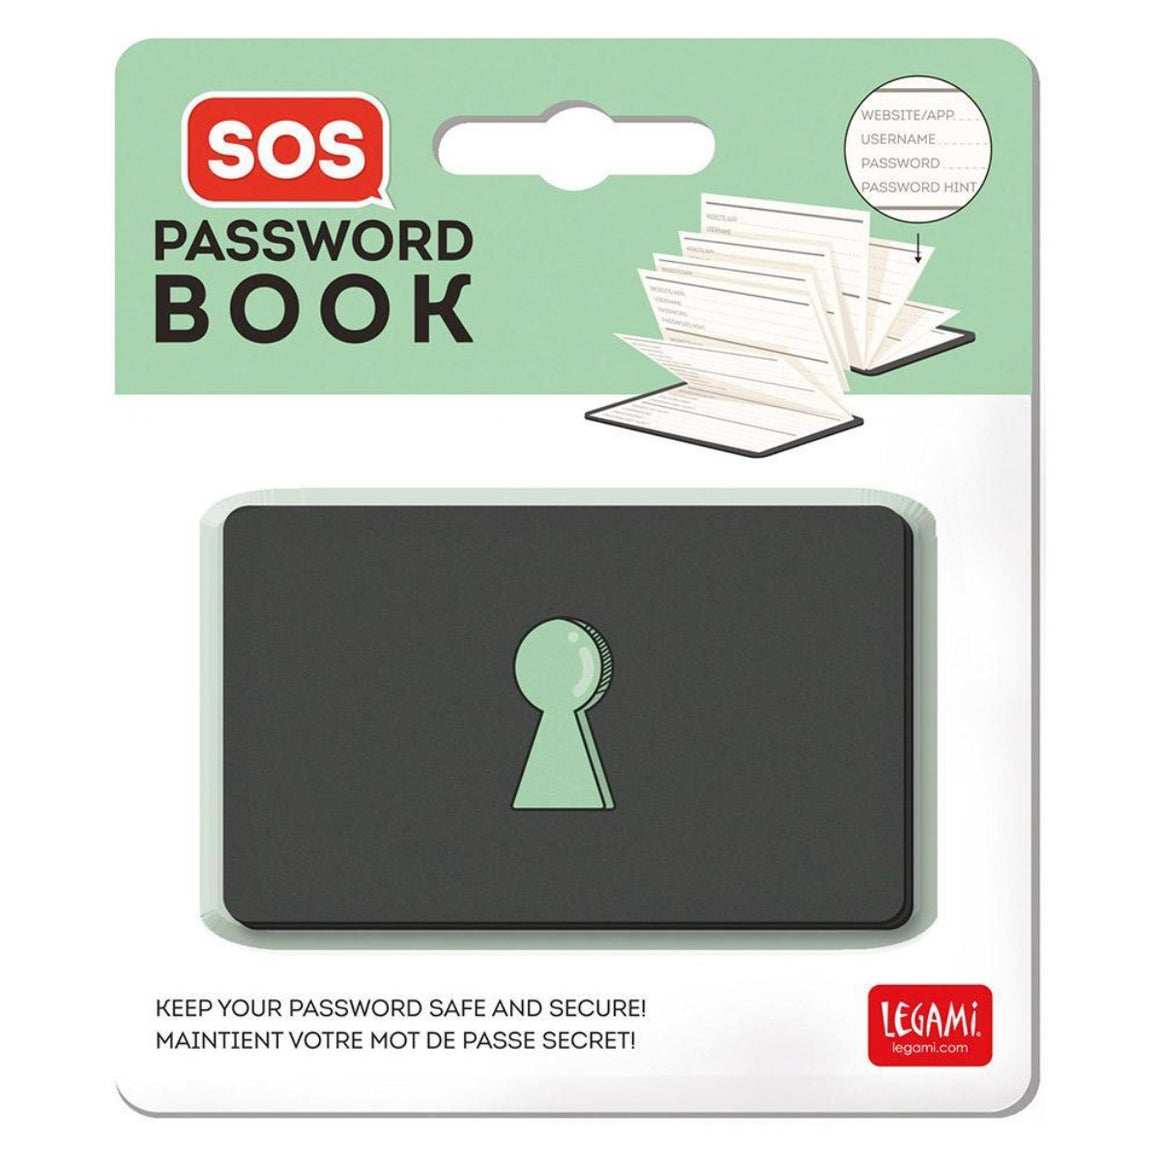 Image featuring the packaging for the Password Book SOS which includes an illustration of how the book folds out and the cover of the item